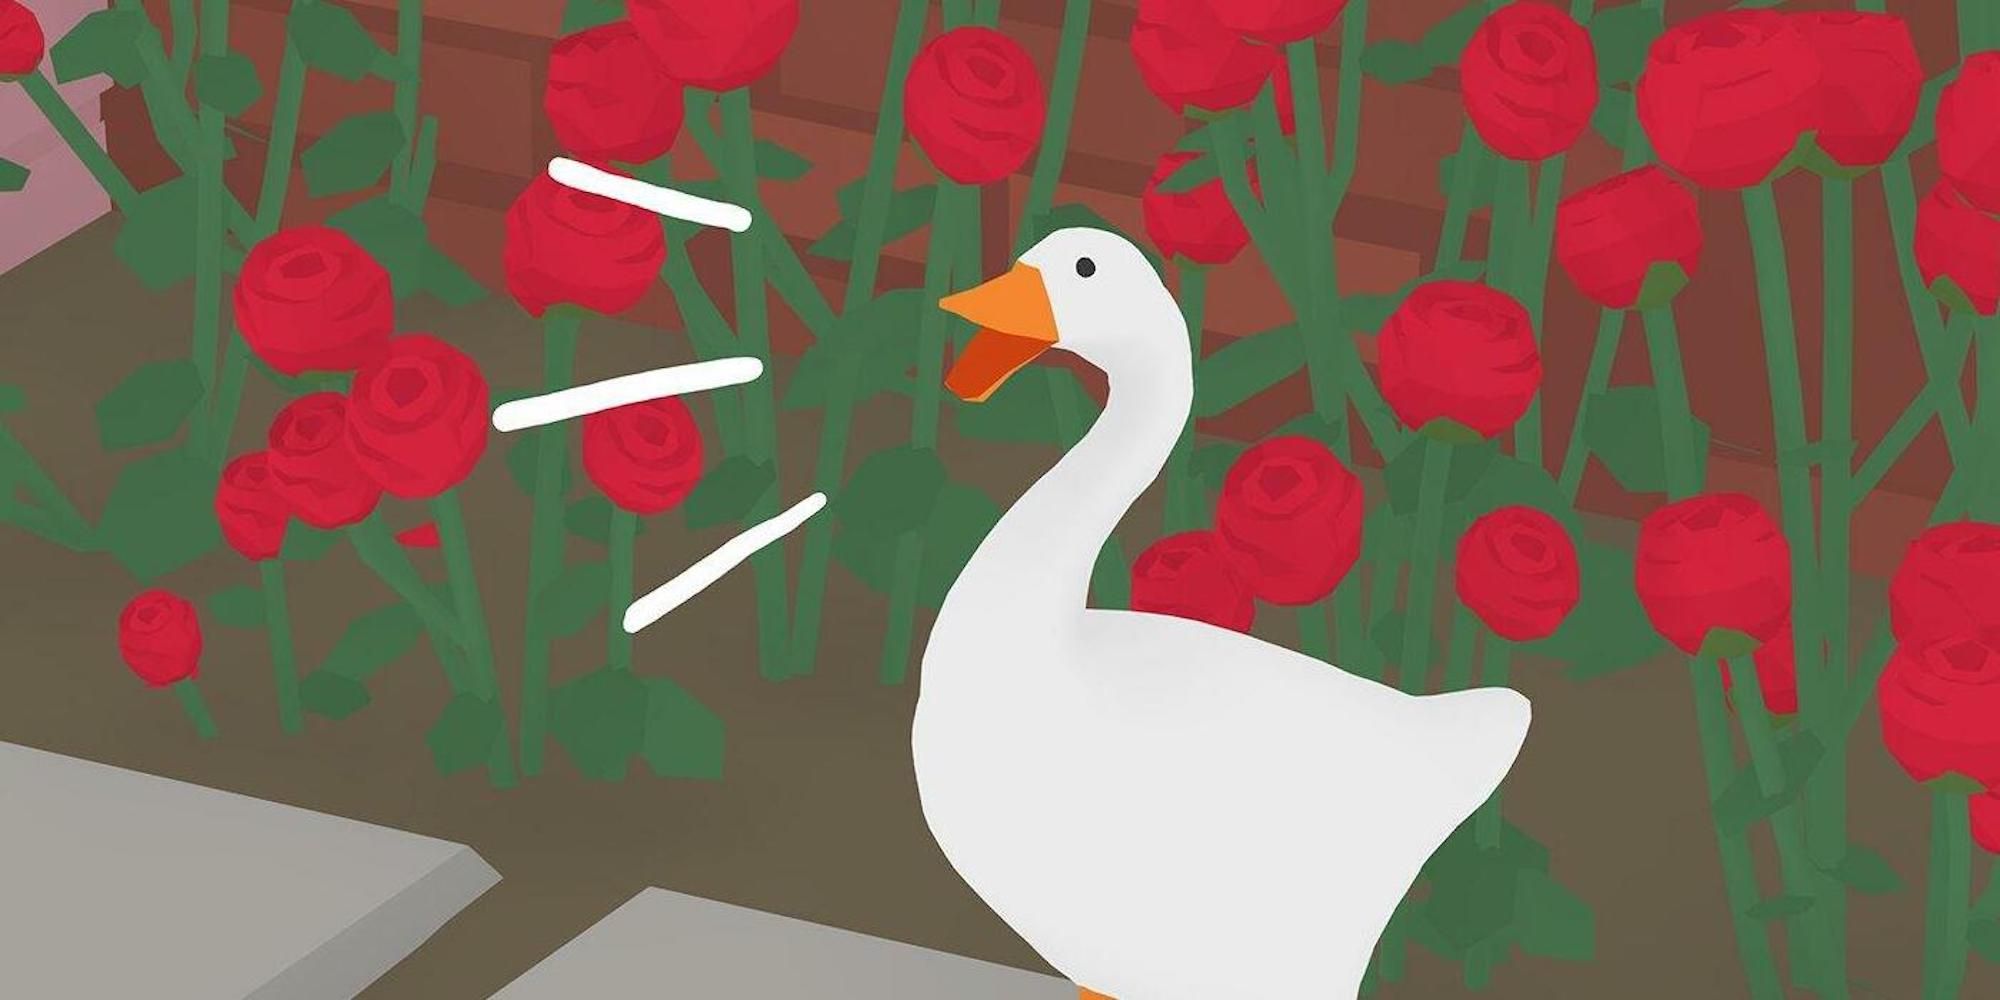 The goose in Untitled Goose Game